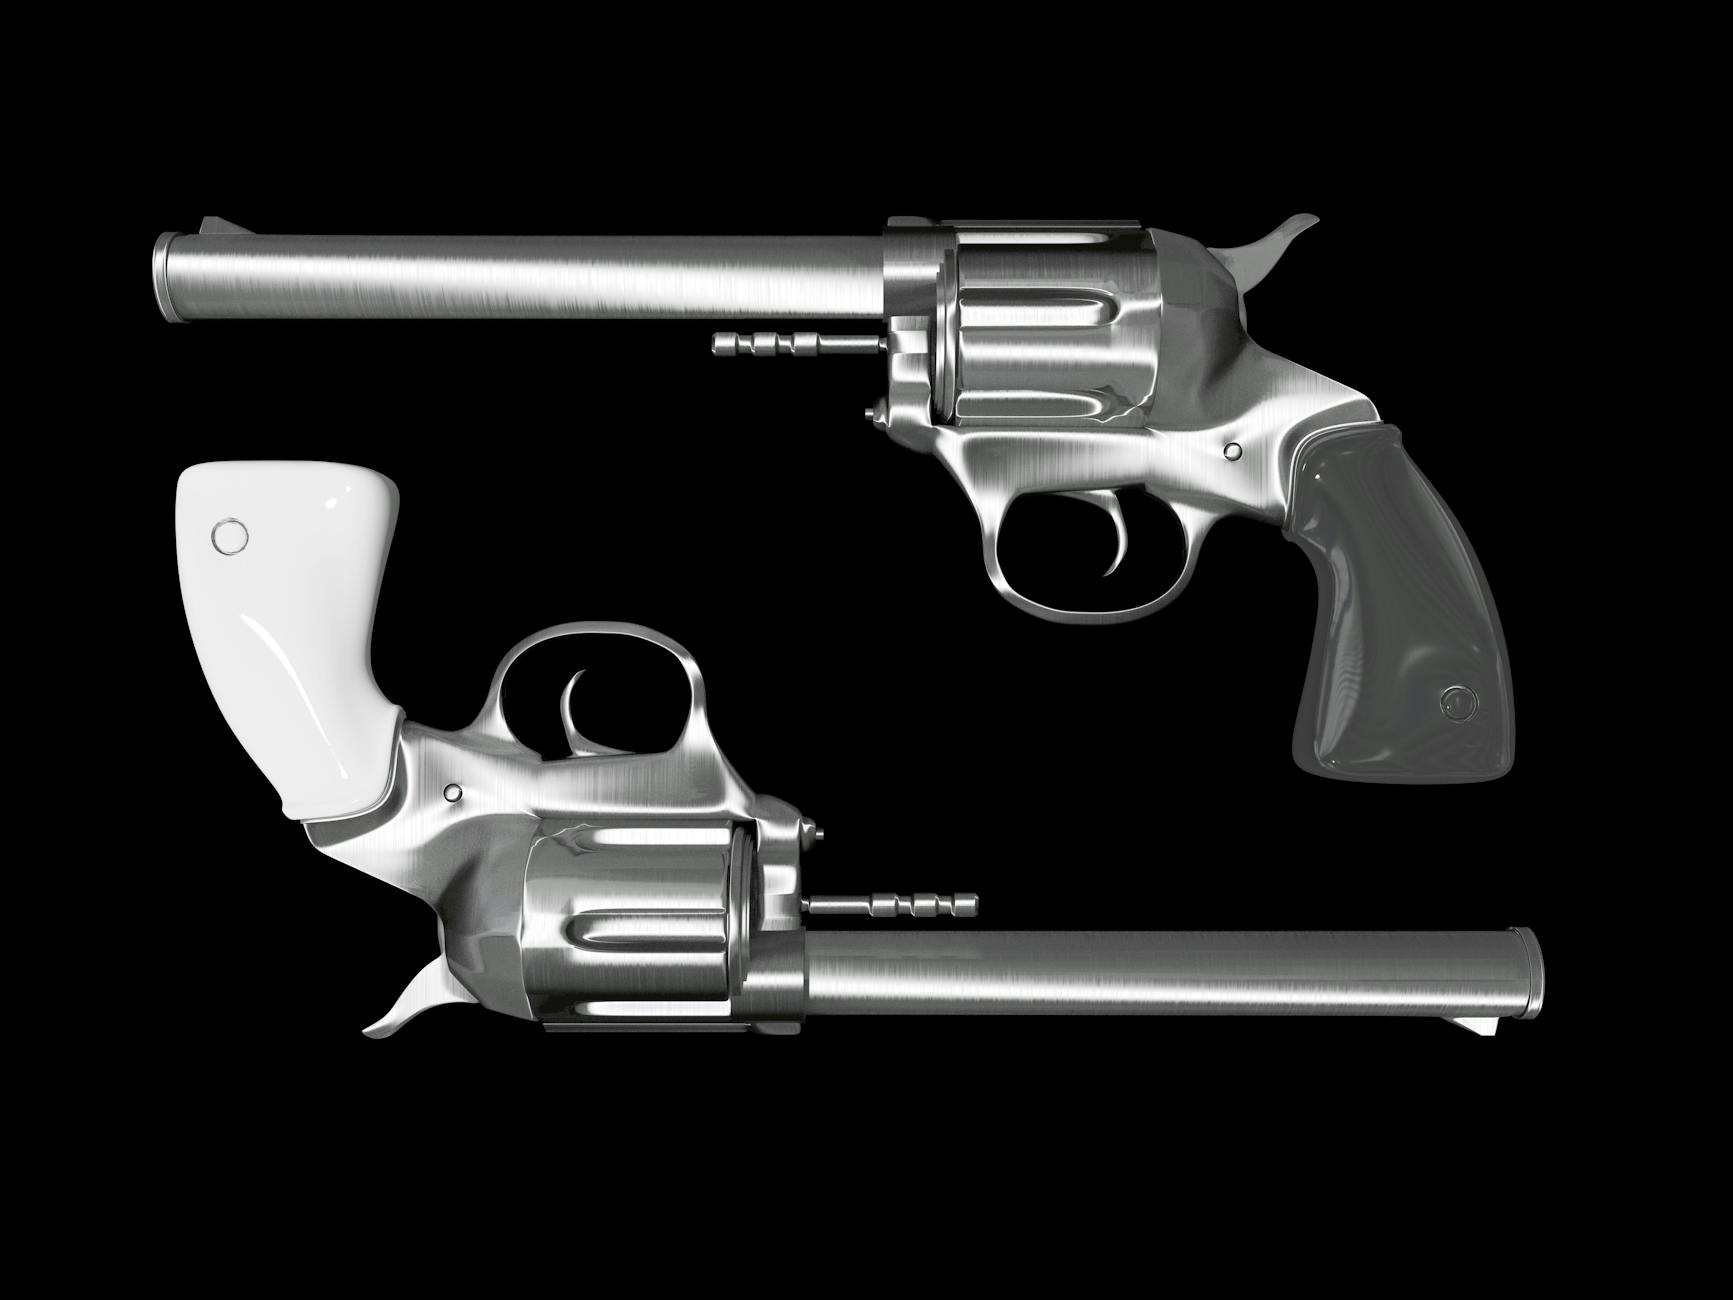 Two pistols on a black background